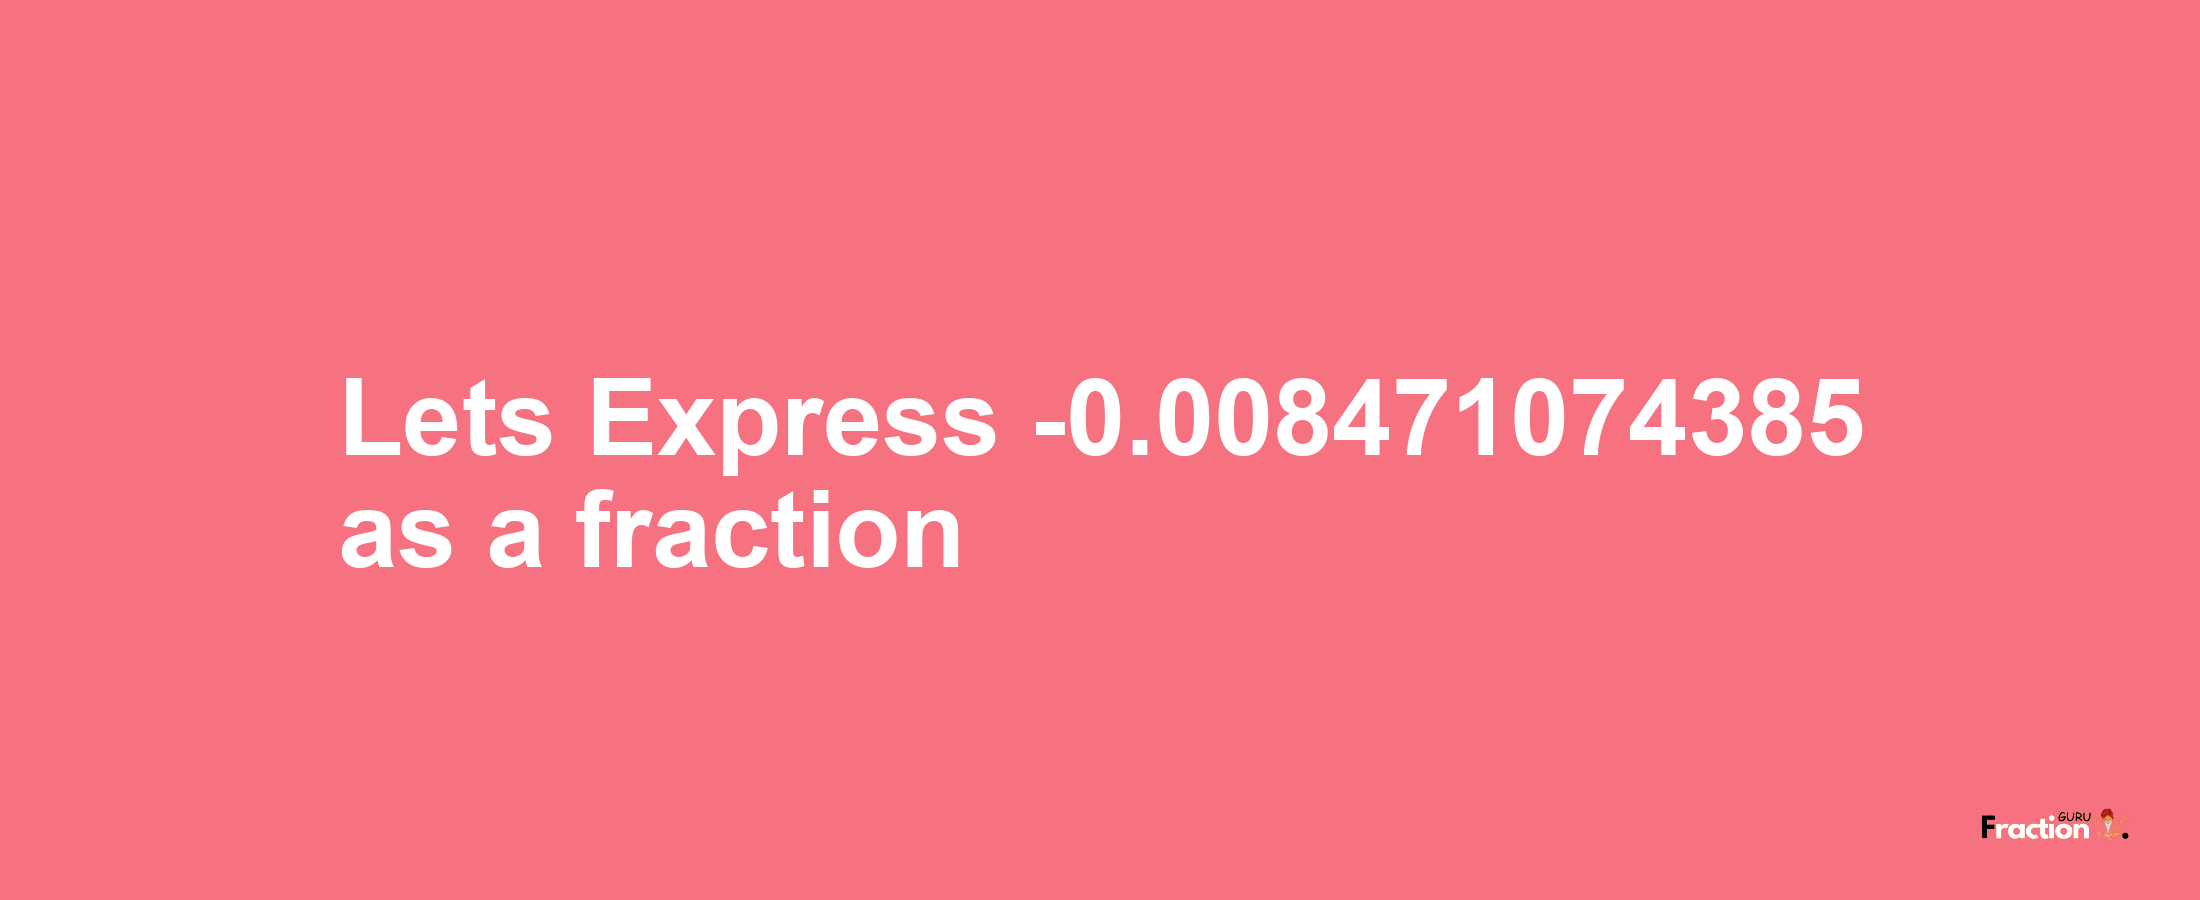 Lets Express -0.008471074385 as afraction